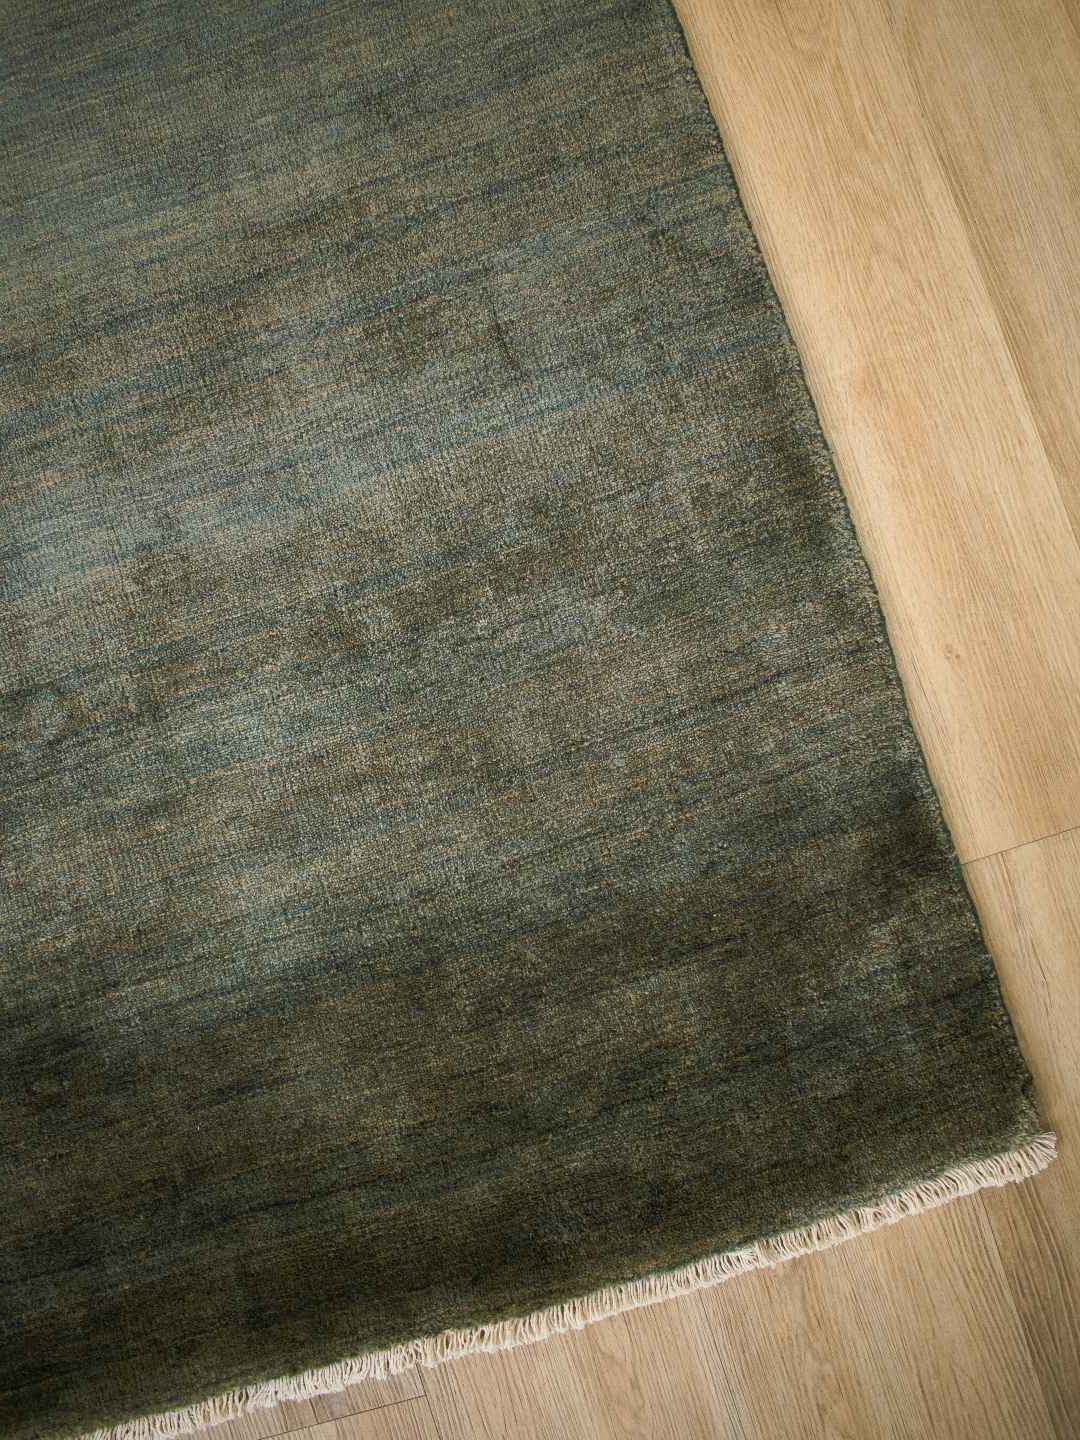 Adore Rug Mangrove Rug 20% off from the Rug Collection Stockist Make Your House A Home, Furniture Store Bendigo. Free Australia Wide Delivery